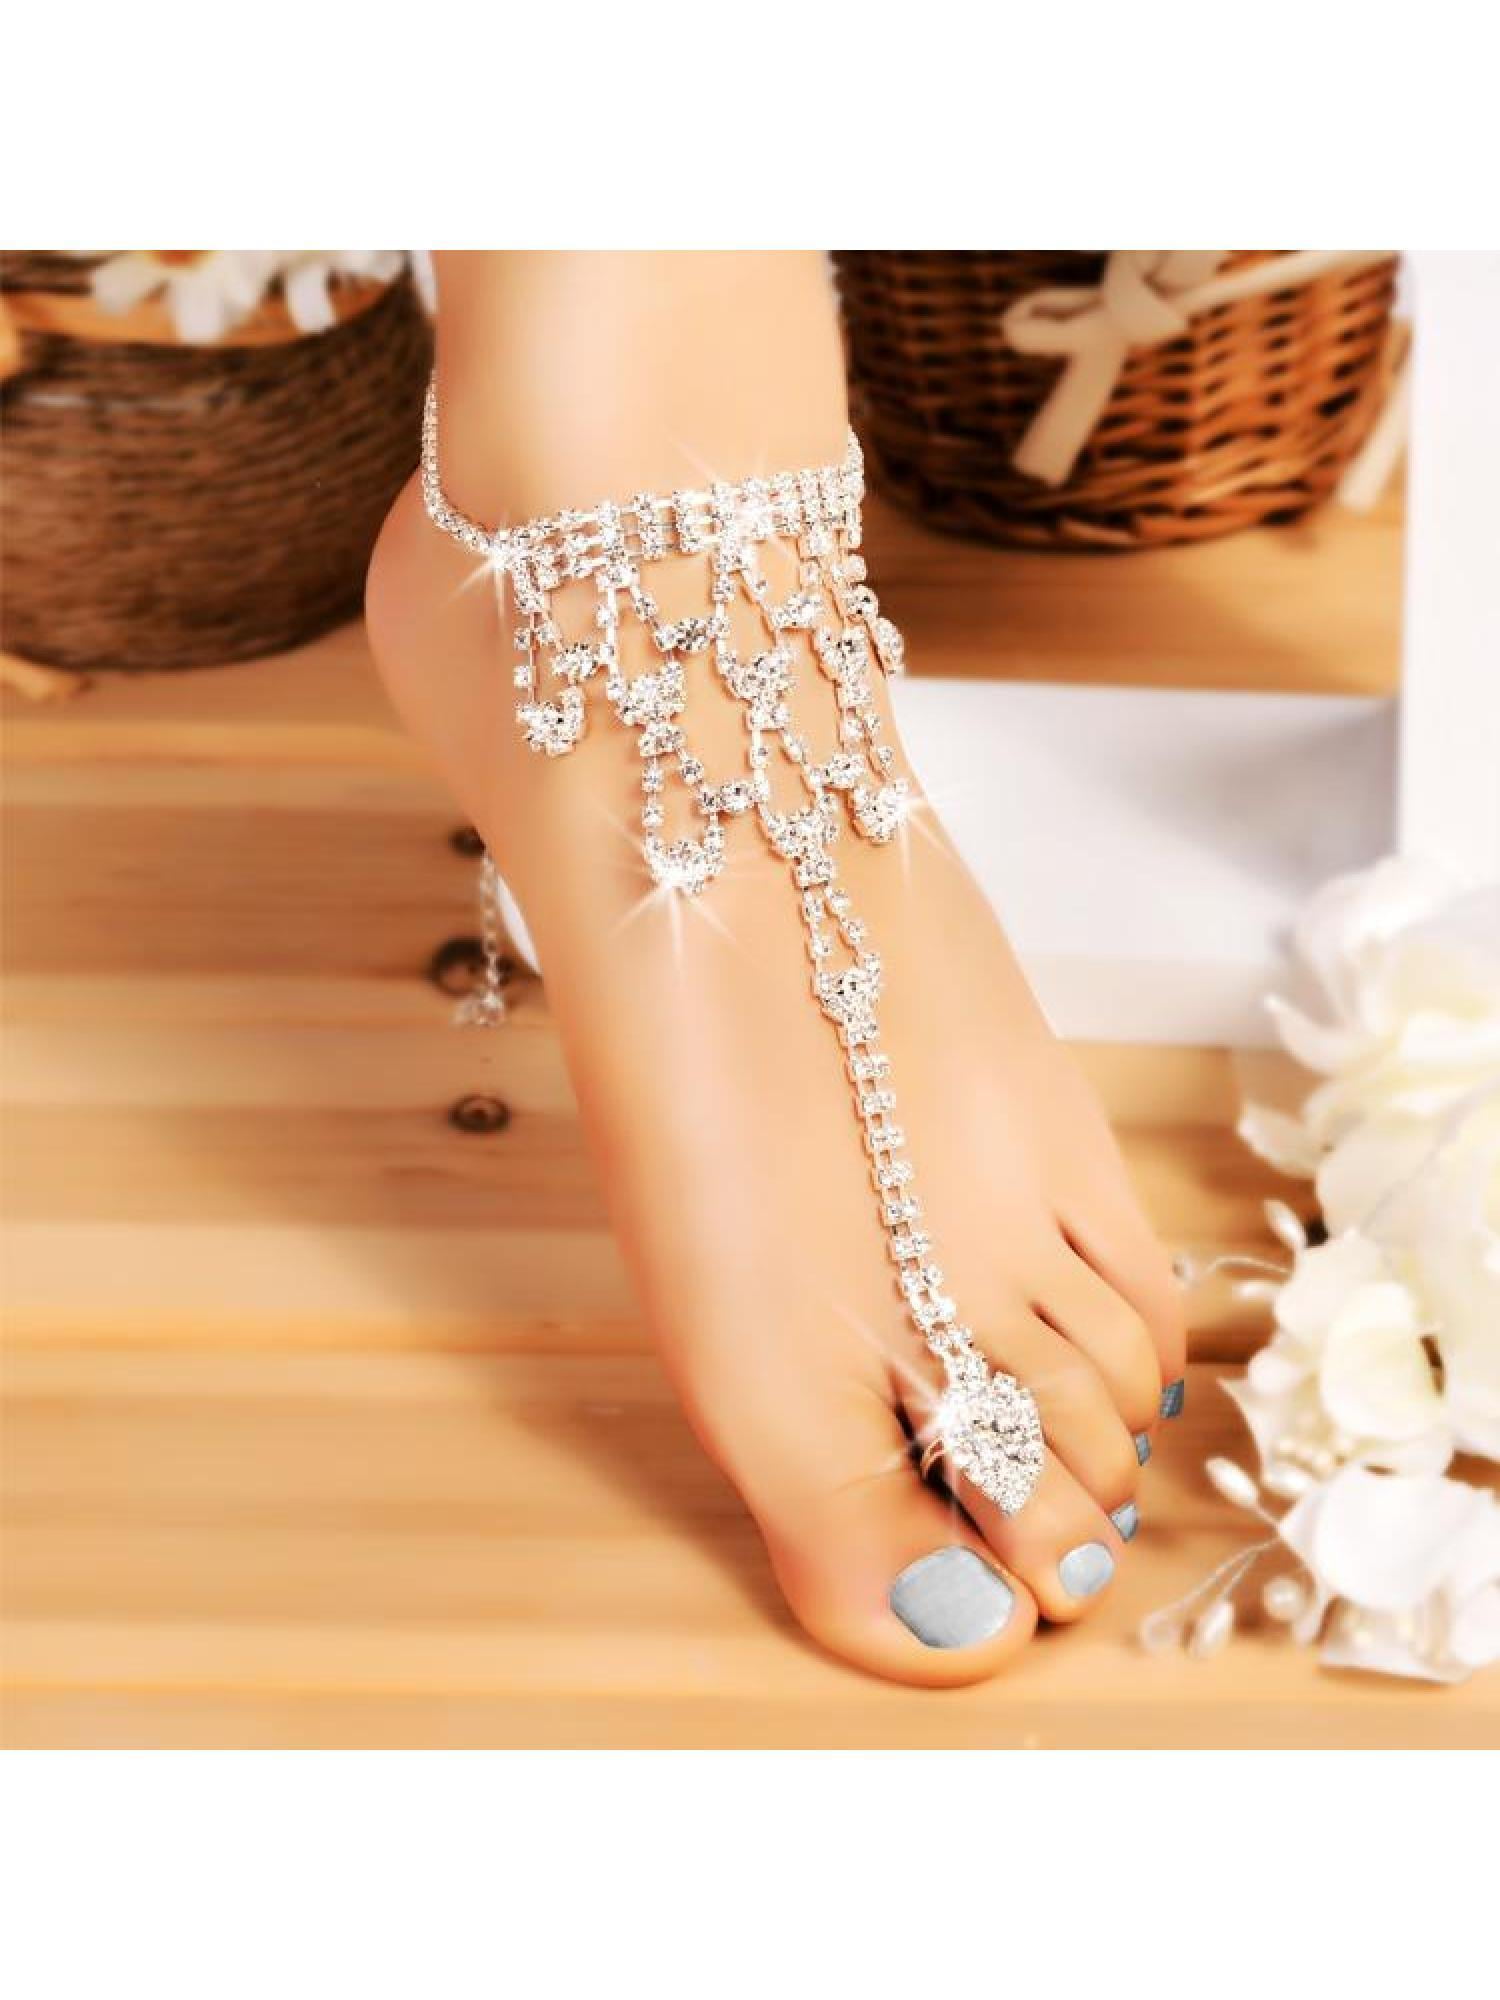 yingyue Women Multilayer Ankle Chain Bracelet Barefoot Sandal Beach Foot Jewelry Anklet